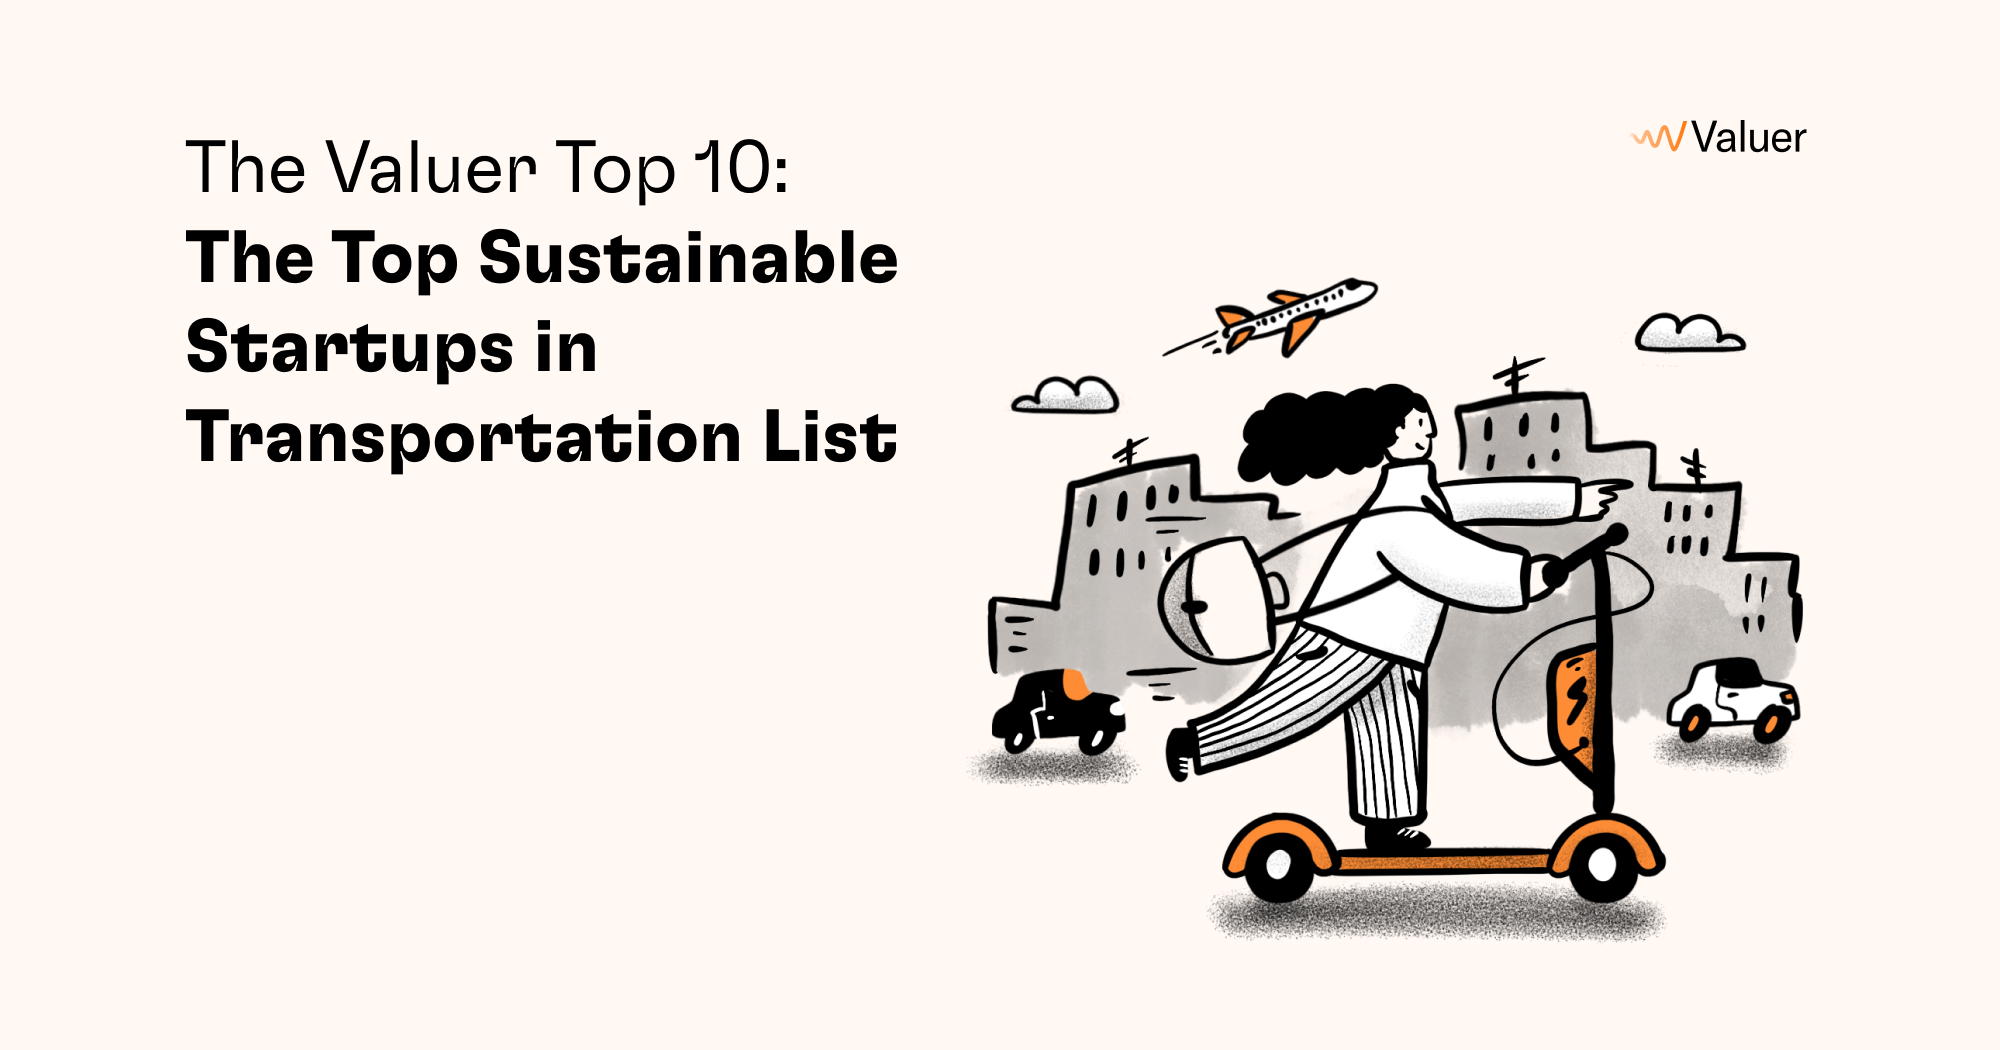 The Top Sustainable Startups in Transportation List